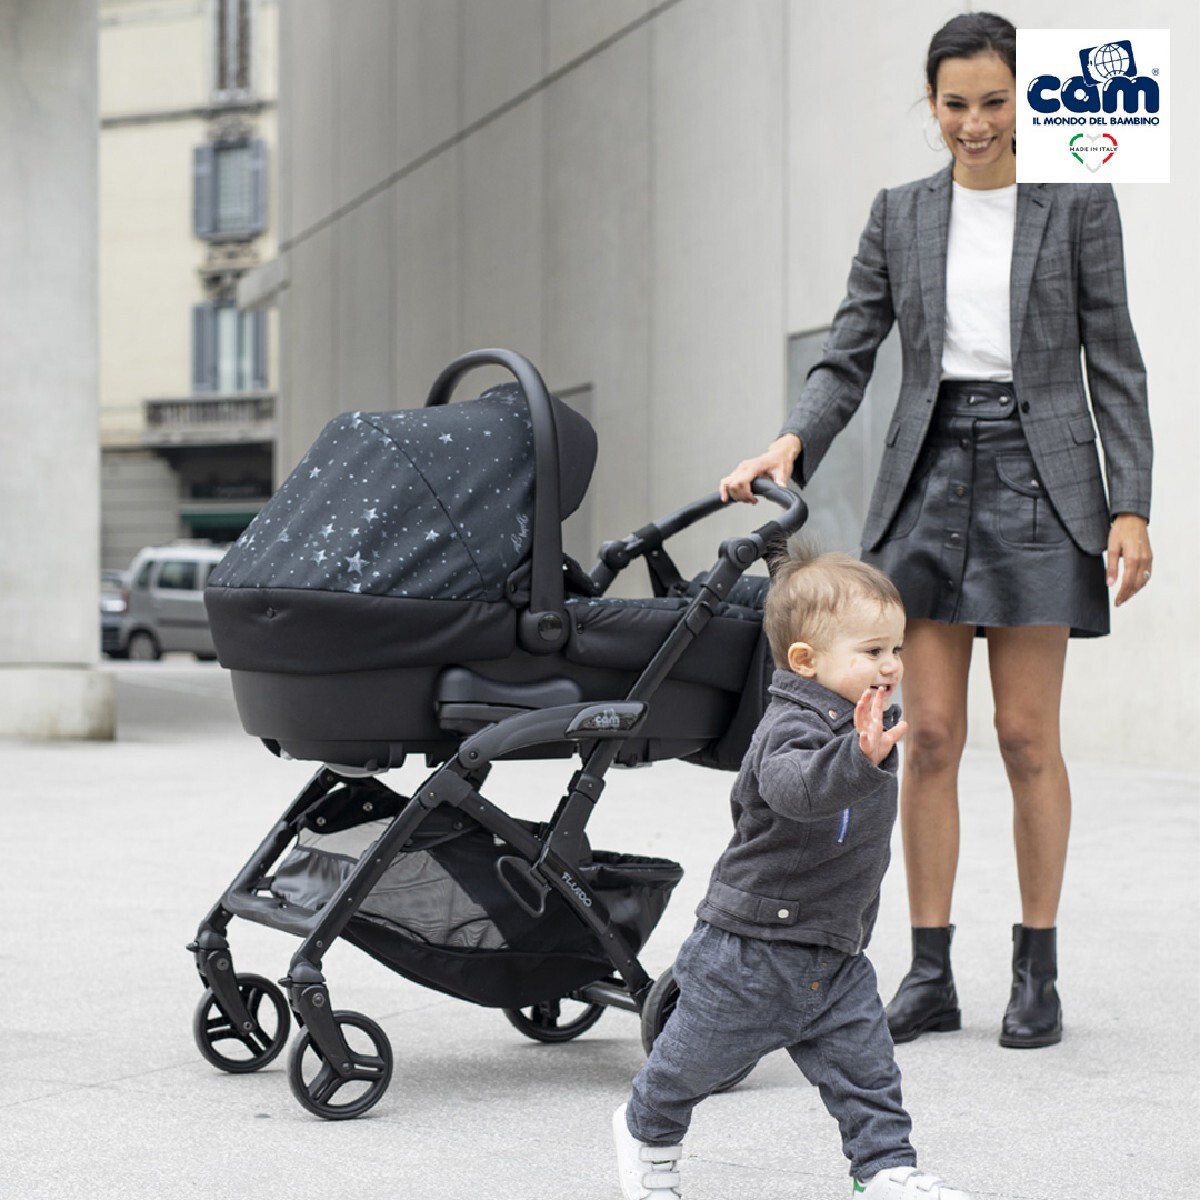 Cam - Fluido Easy Baby Travel System - Light Grey, Adjustable 3-position backrest, from 0 to 4 years old (22 kg.) 5-point-safety harness, Freestanding when folded, Made in italy. 